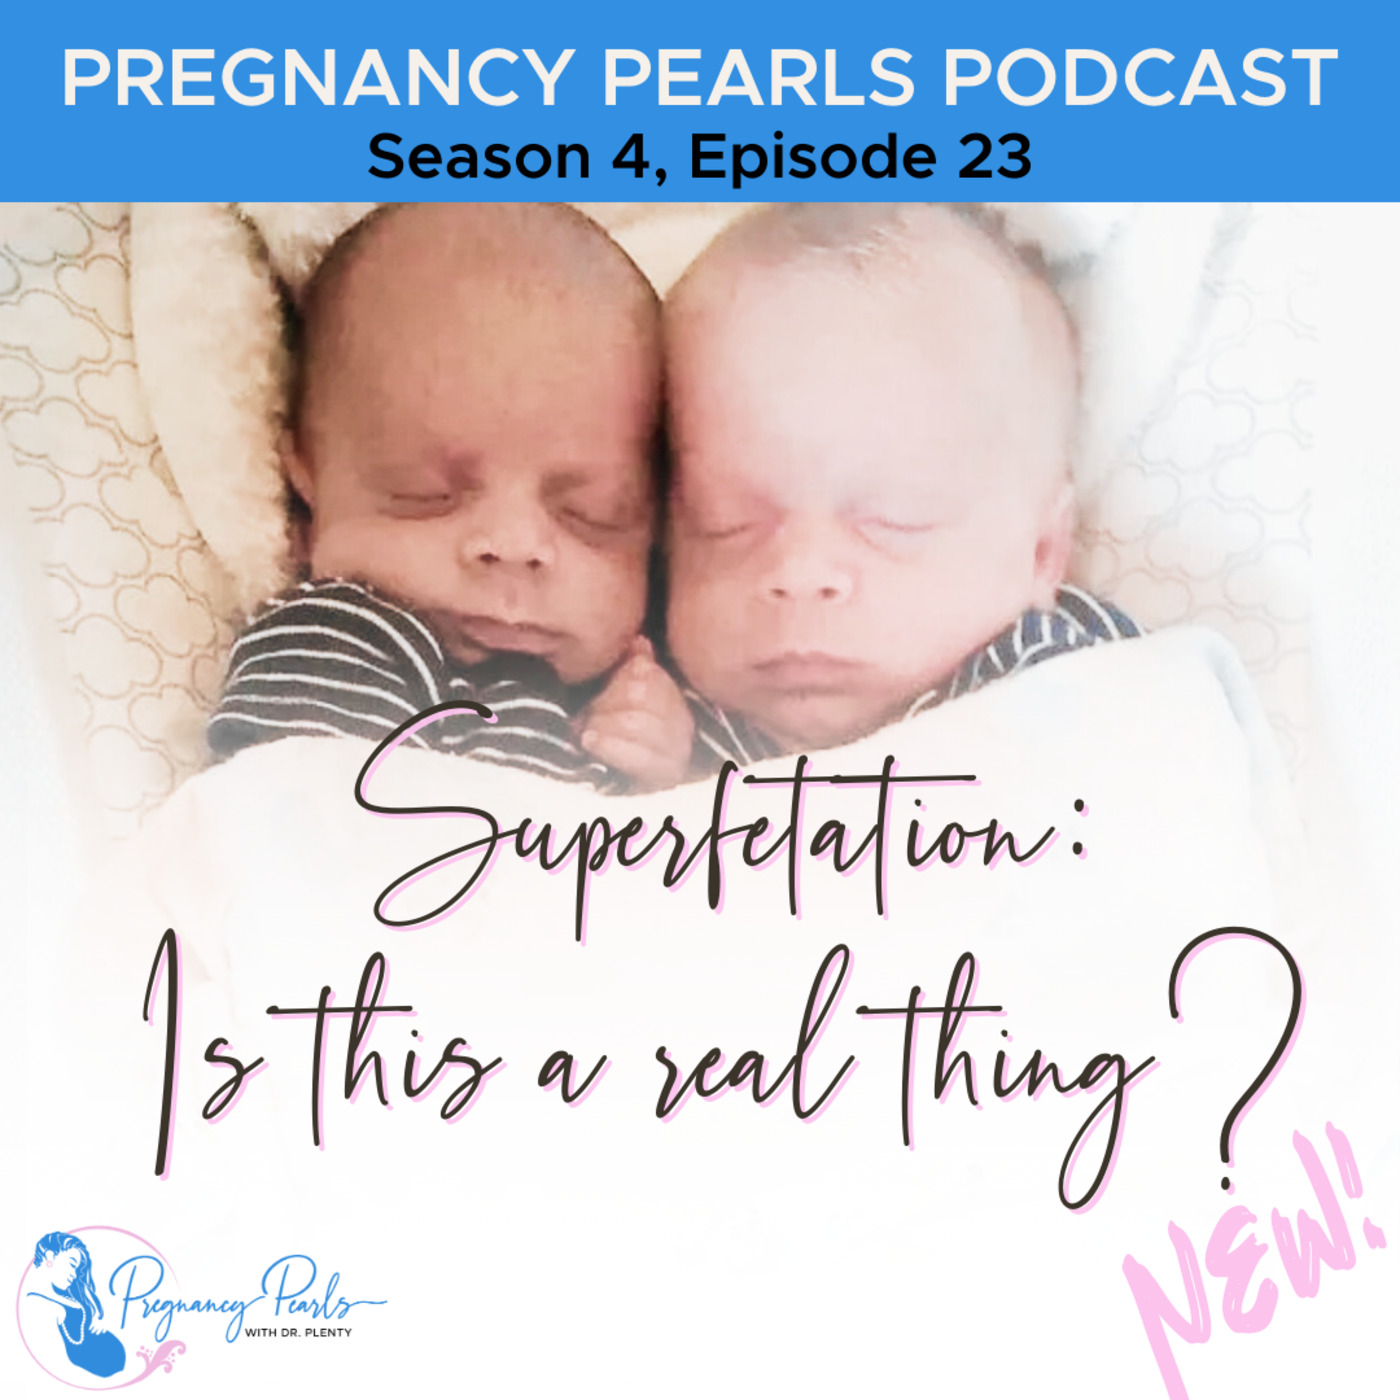 Superfetation: Is this a real thing?